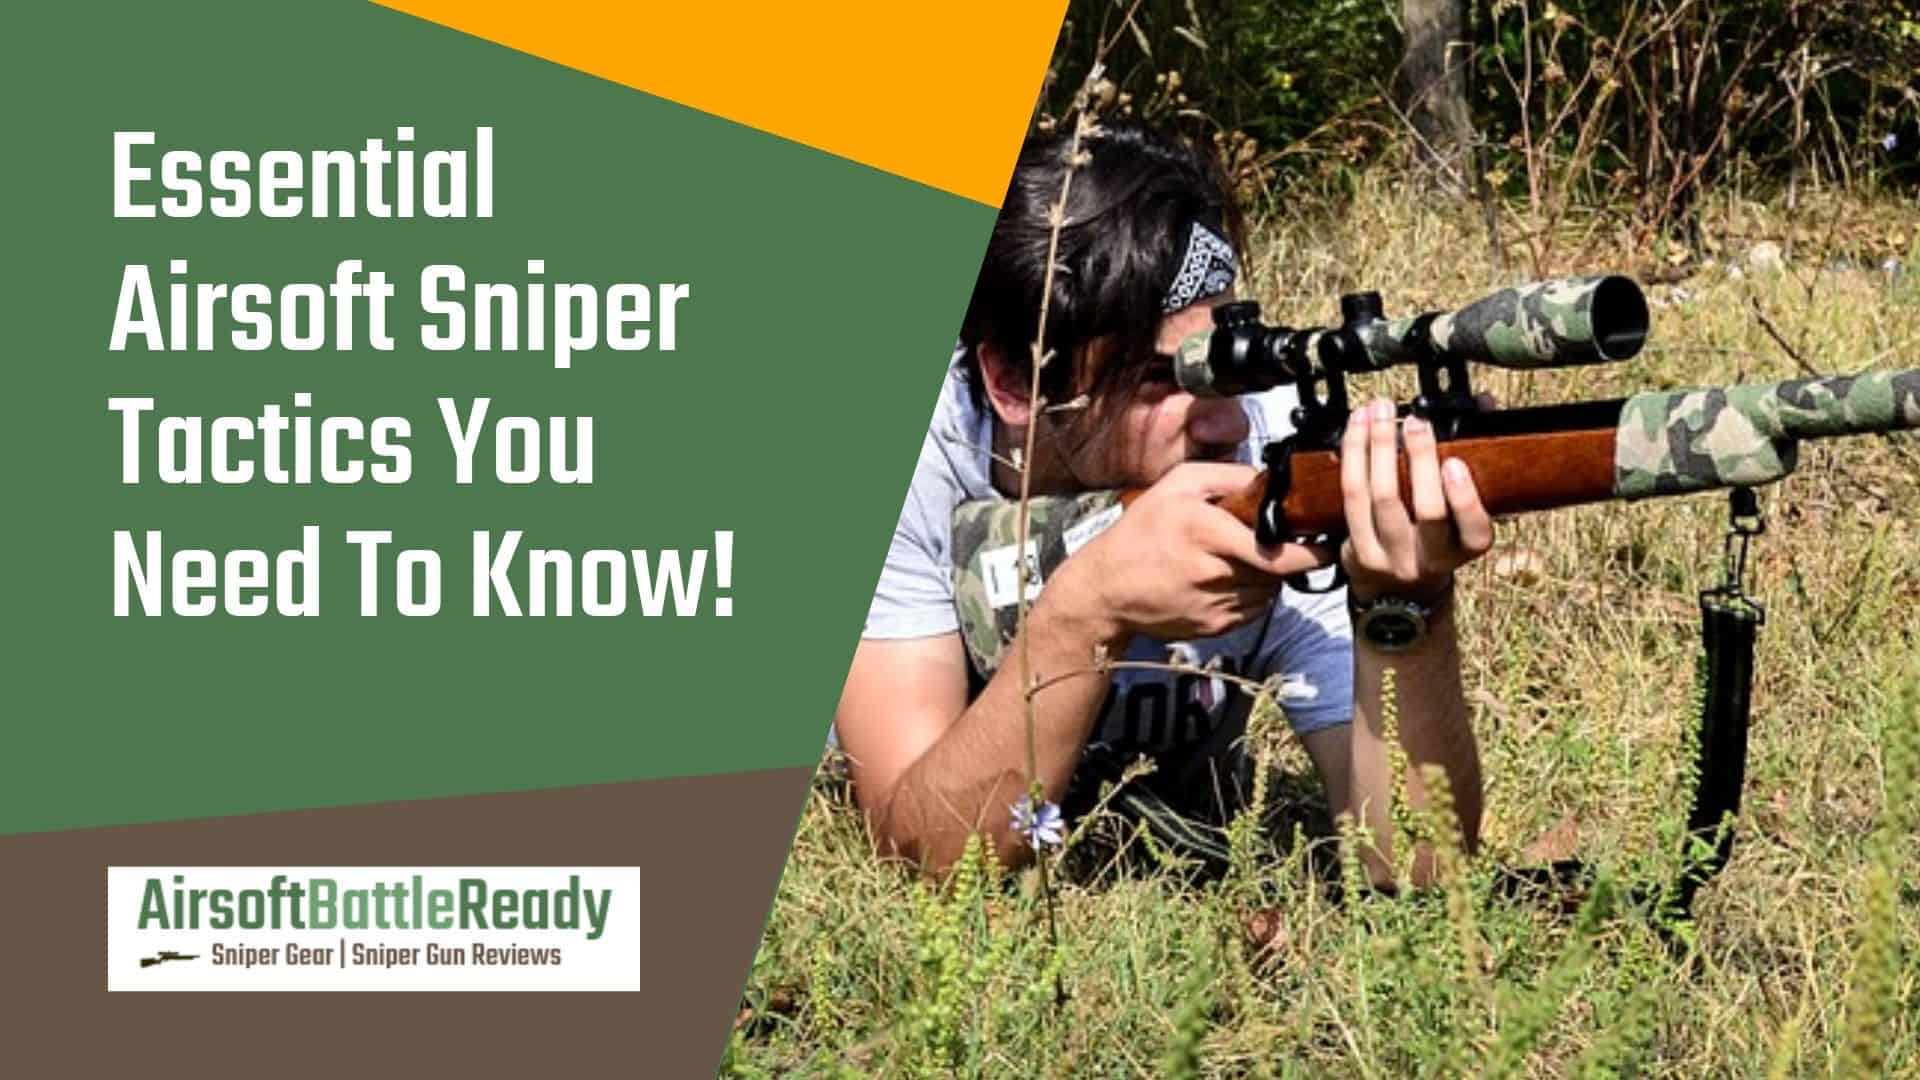 Essential Airsoft Sniper Tactics You Need To Know - Airsoft Battle Ready